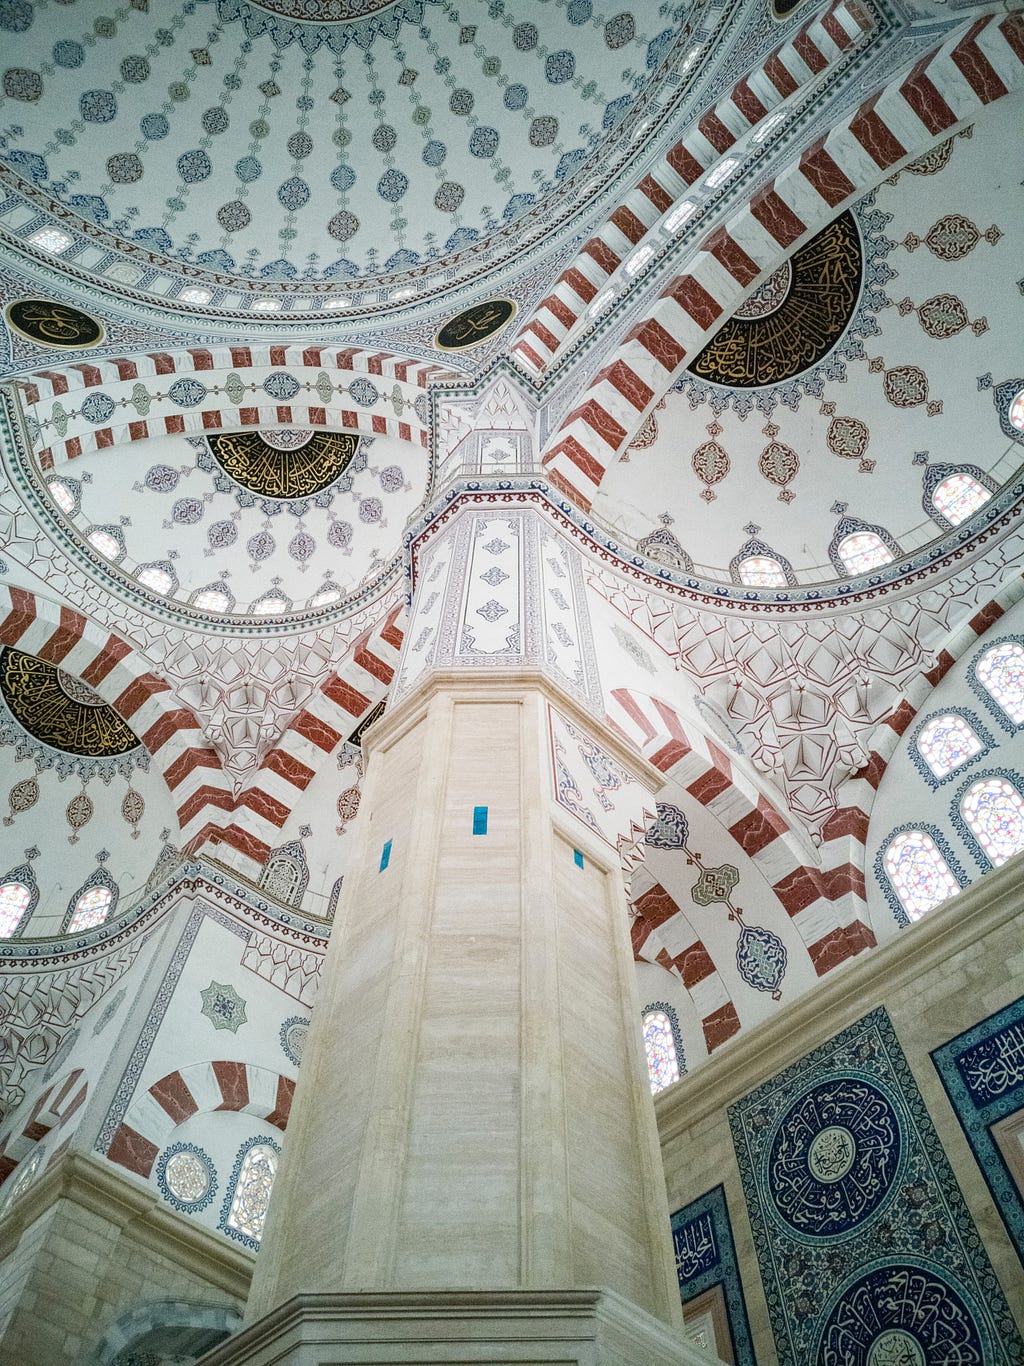 Note the rondels both on the ceiling and the walls in this mosque in Turkey. Photo by Engin Akyurt from Pexels